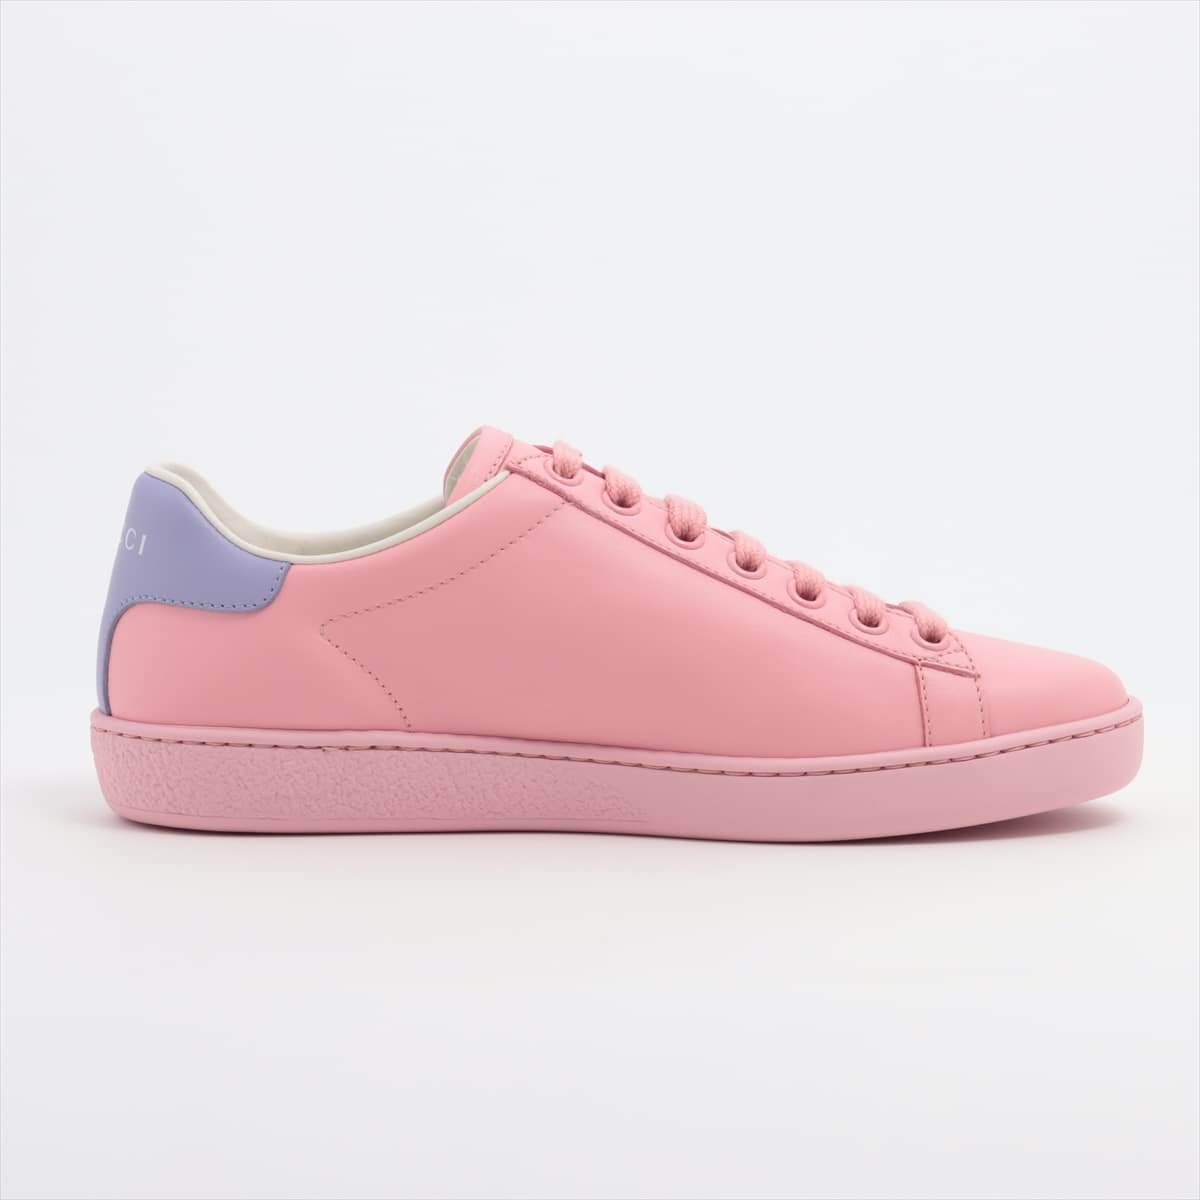 Gucci Interlocking G Leather Sneakers 34 1/2 Ladies' Pink 598527 There is a box